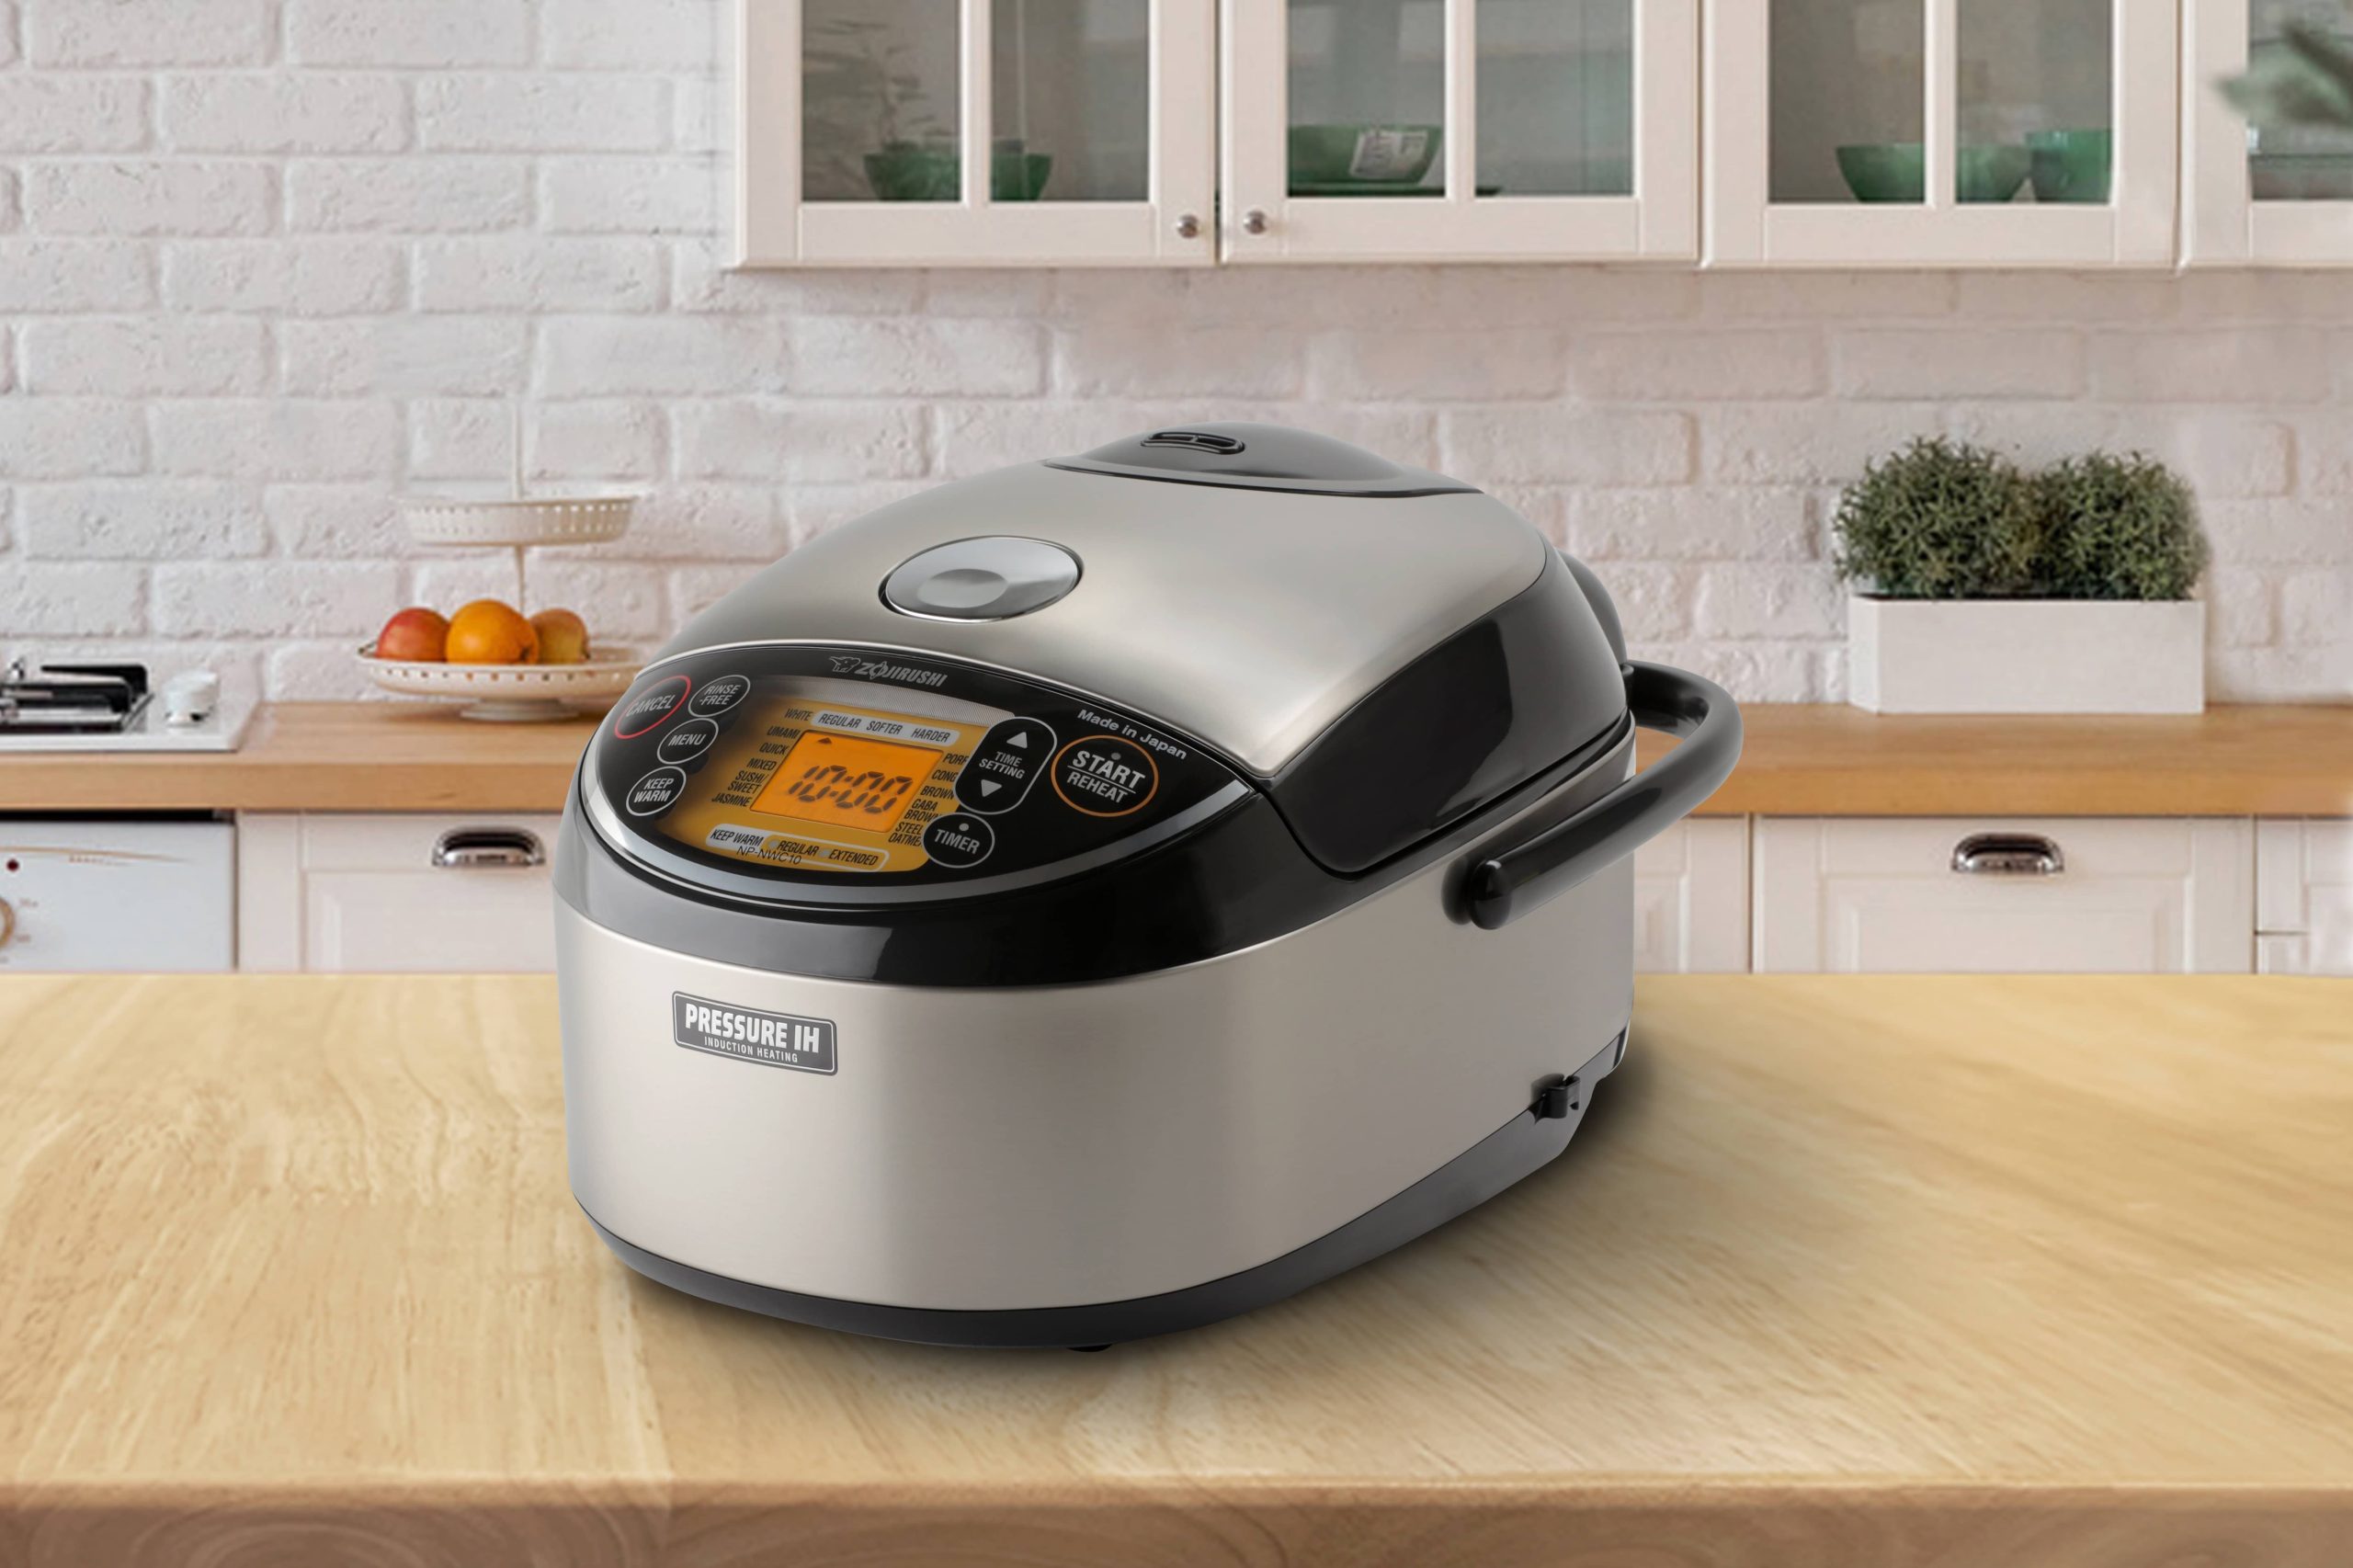 Electric Rice Cooker - A Precise Way to Cook Rice & Other Recipes